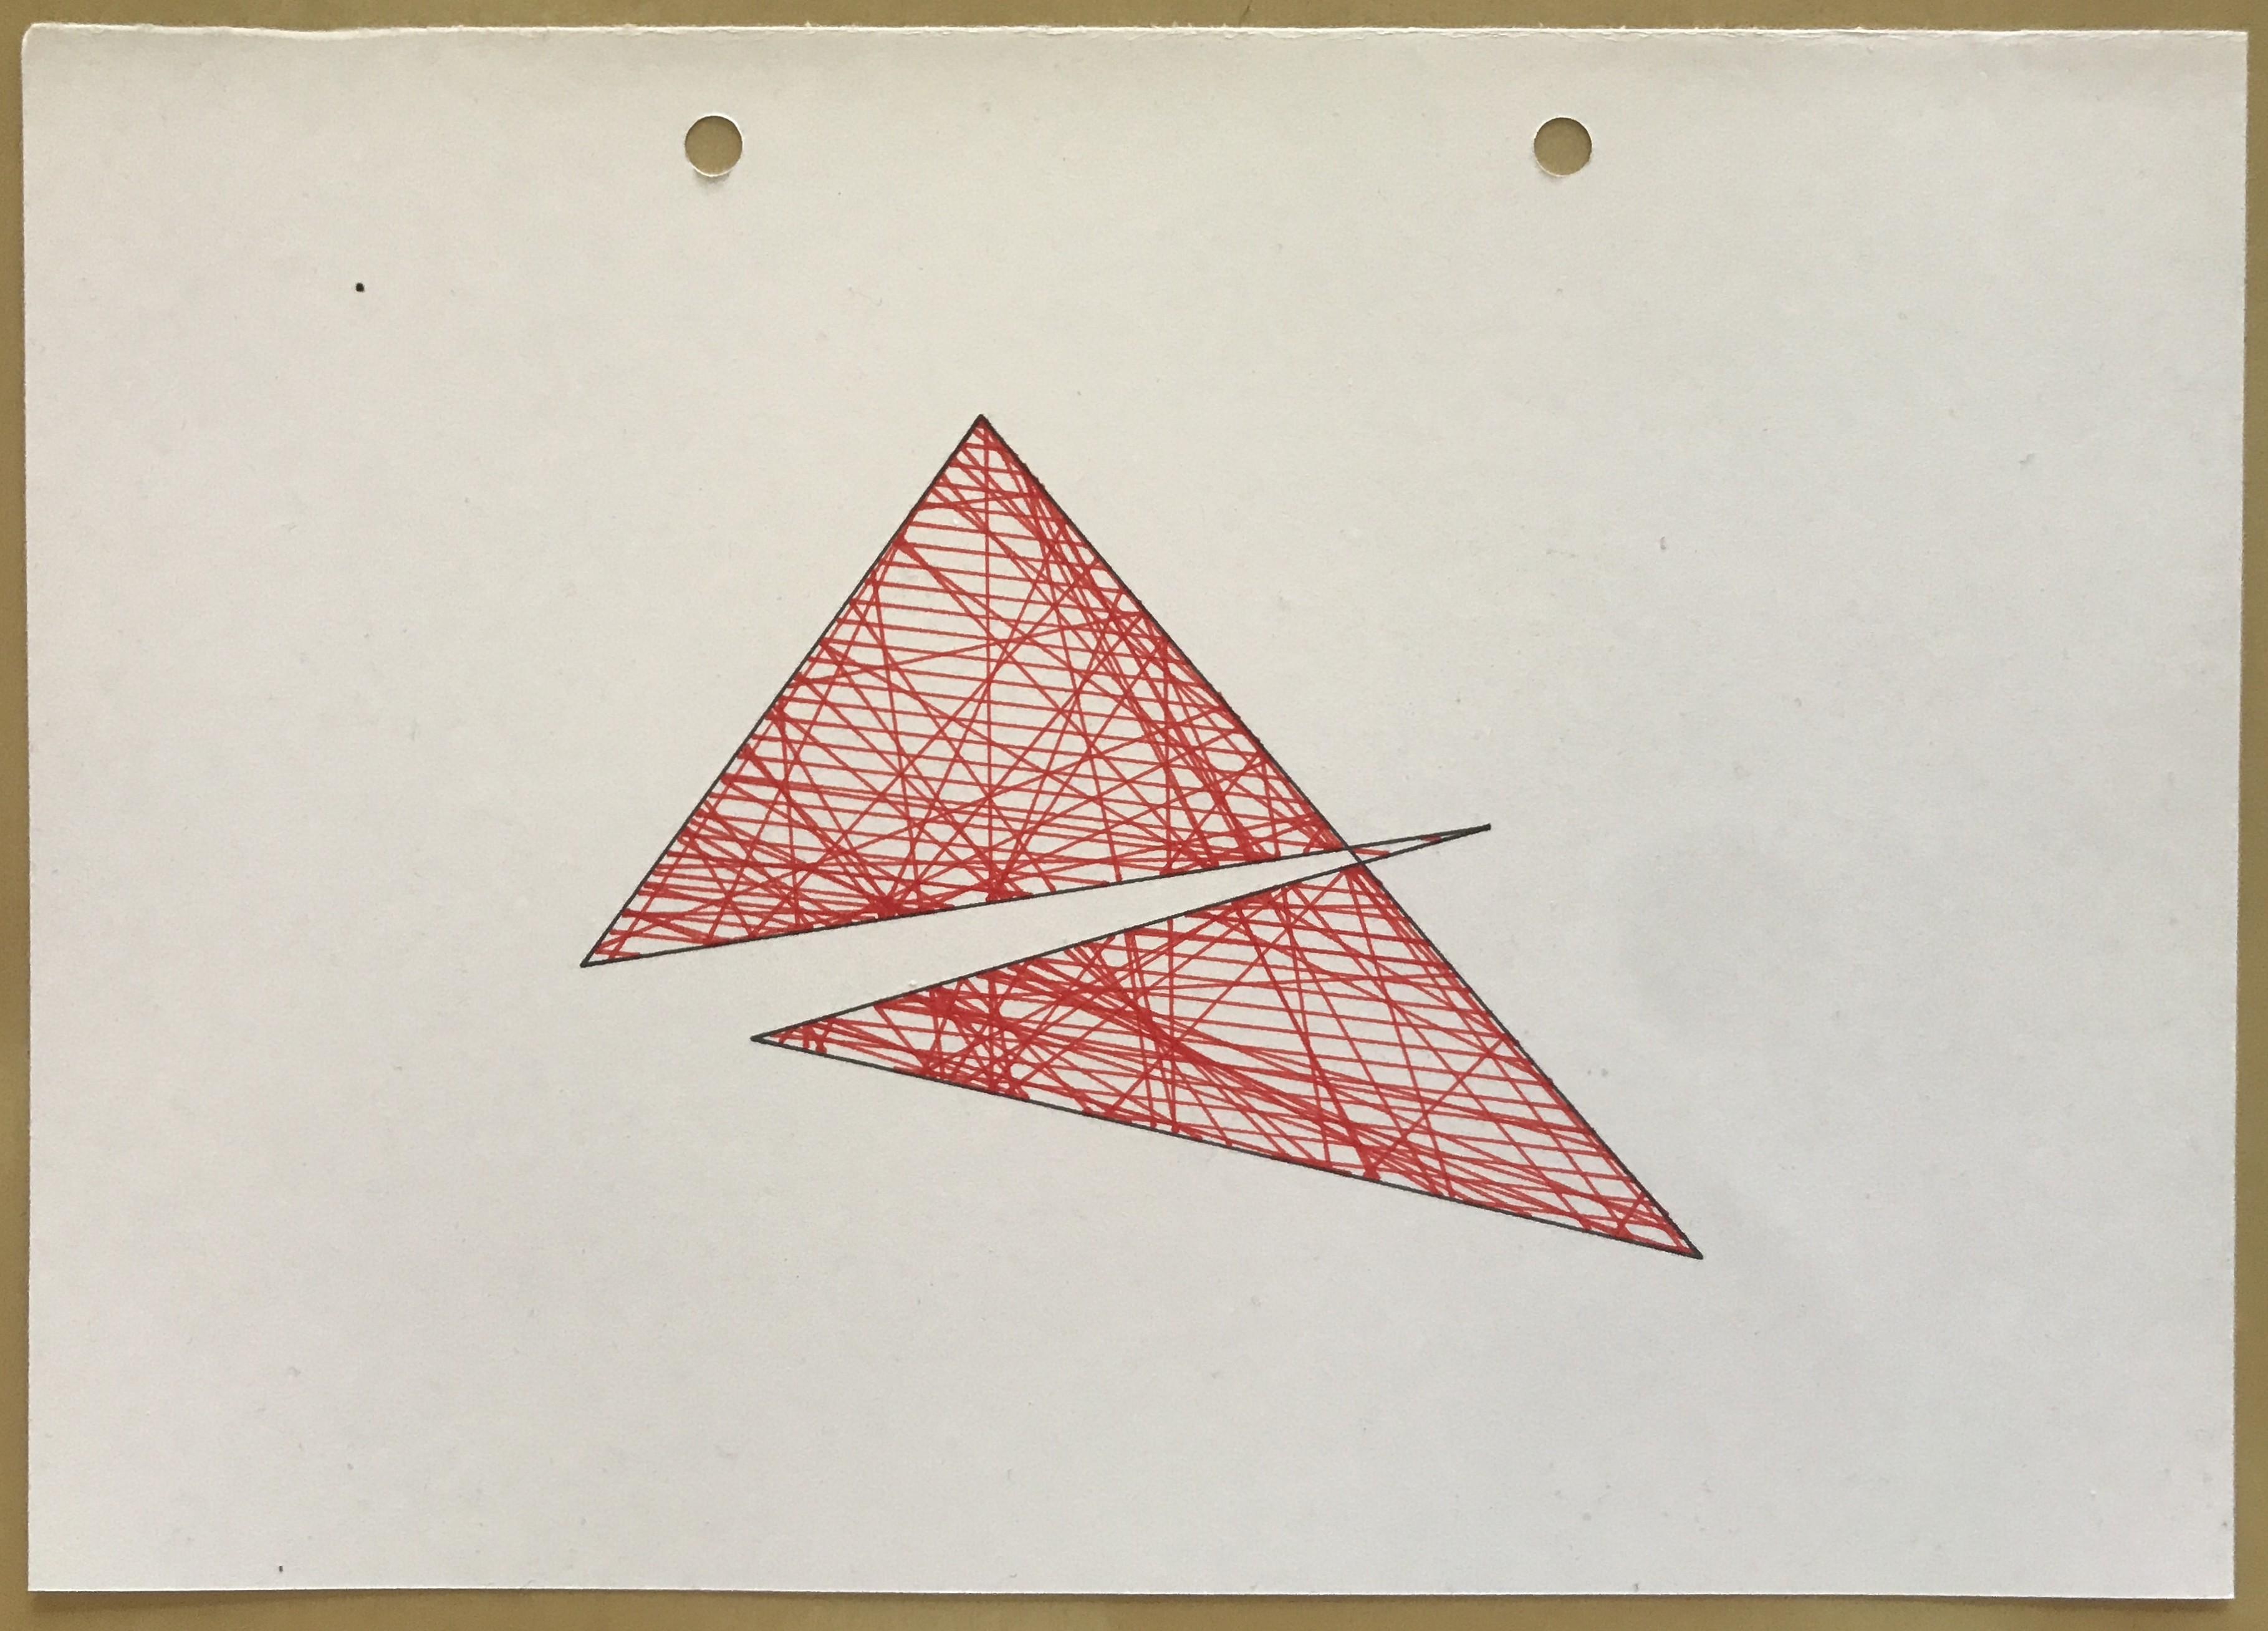 Plotter drawing of a self-intersecting polygon of five vertices, filled with crisscrossing random red lines.